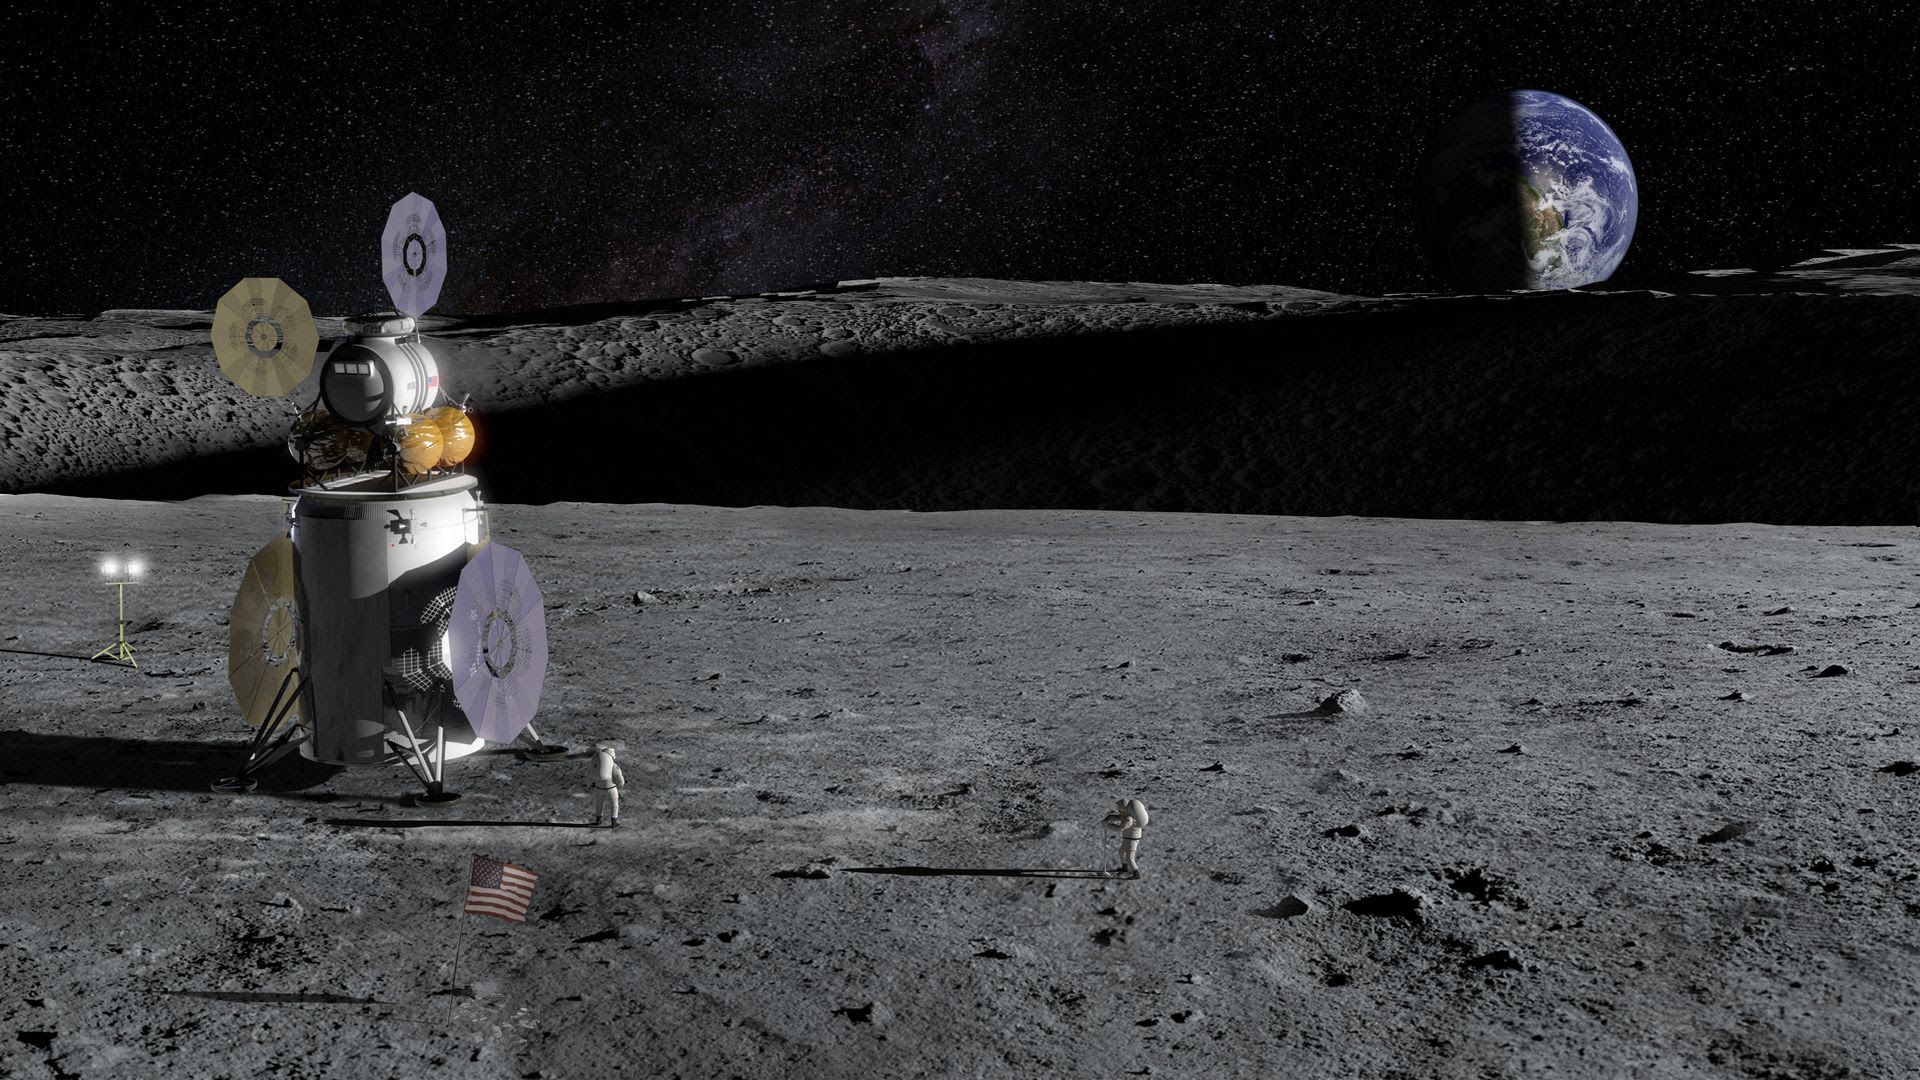 Illustration of a lander and astronauts on the moon. Photo: NASA